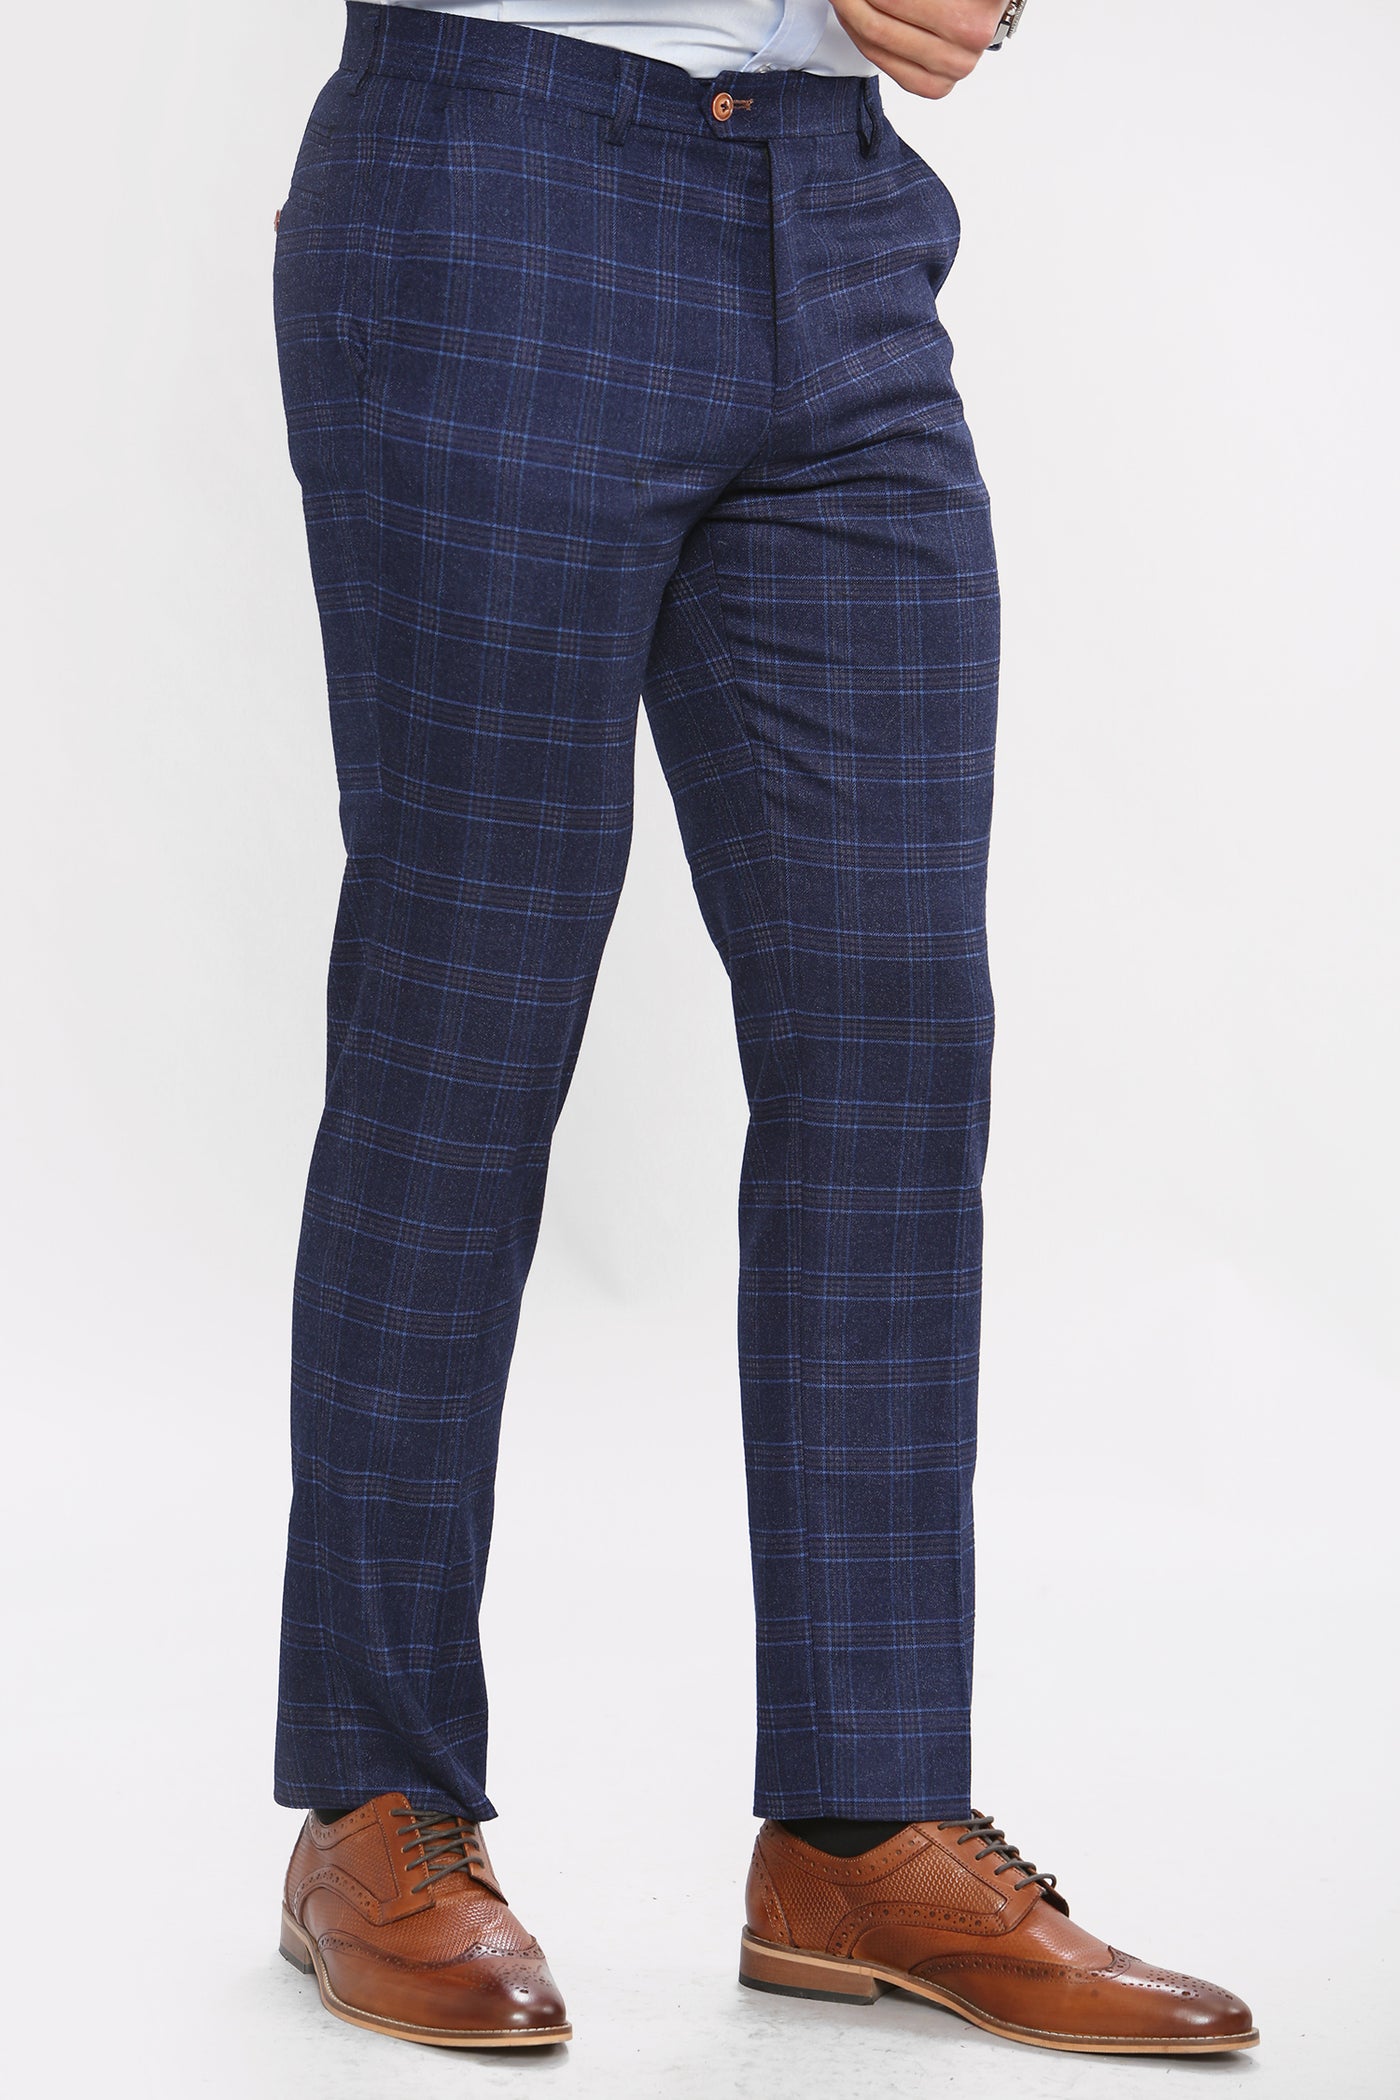 CHIGWELL - Blue Tweed Check Trousers